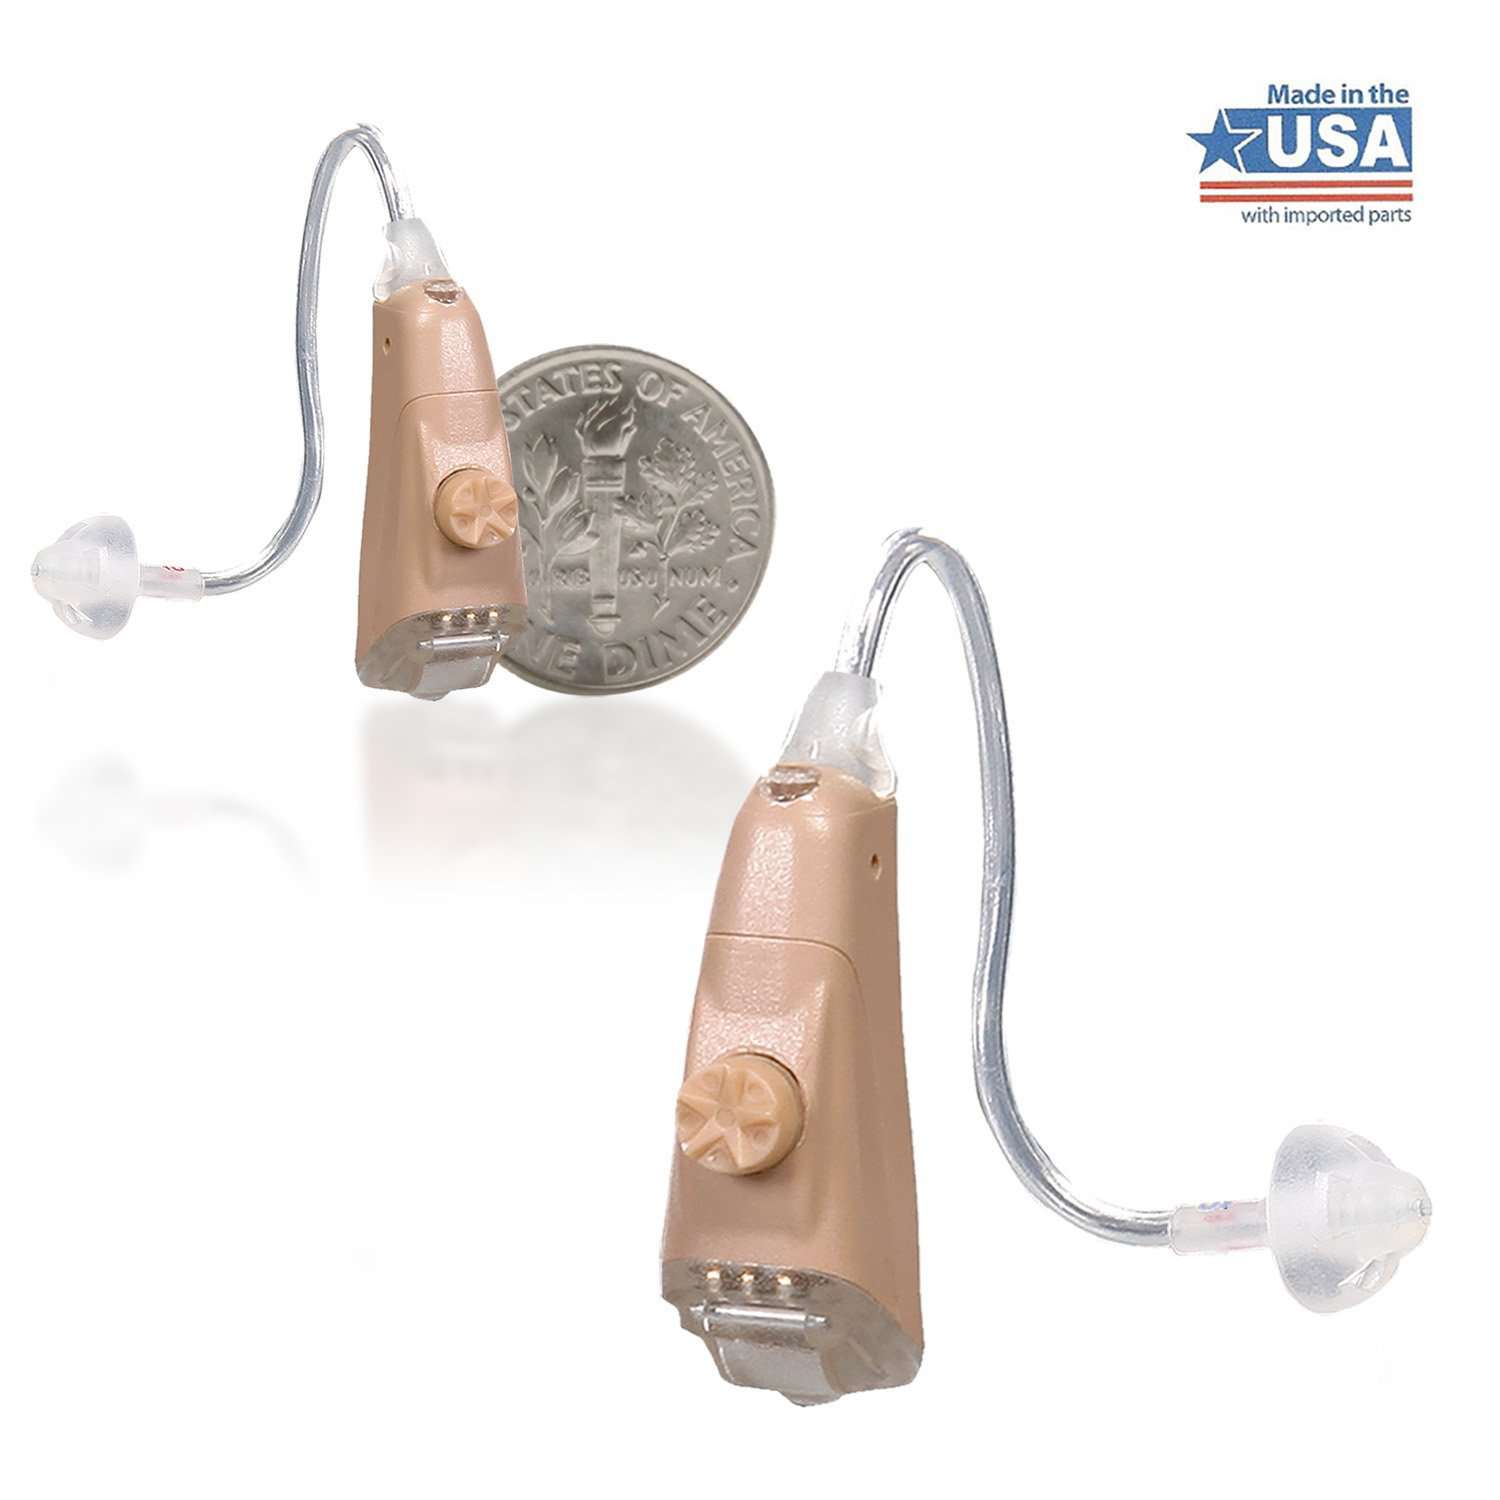 General Hearing Instruments Simplicity Hi Fi 270 Over The Ear Hearing Aid Pair New